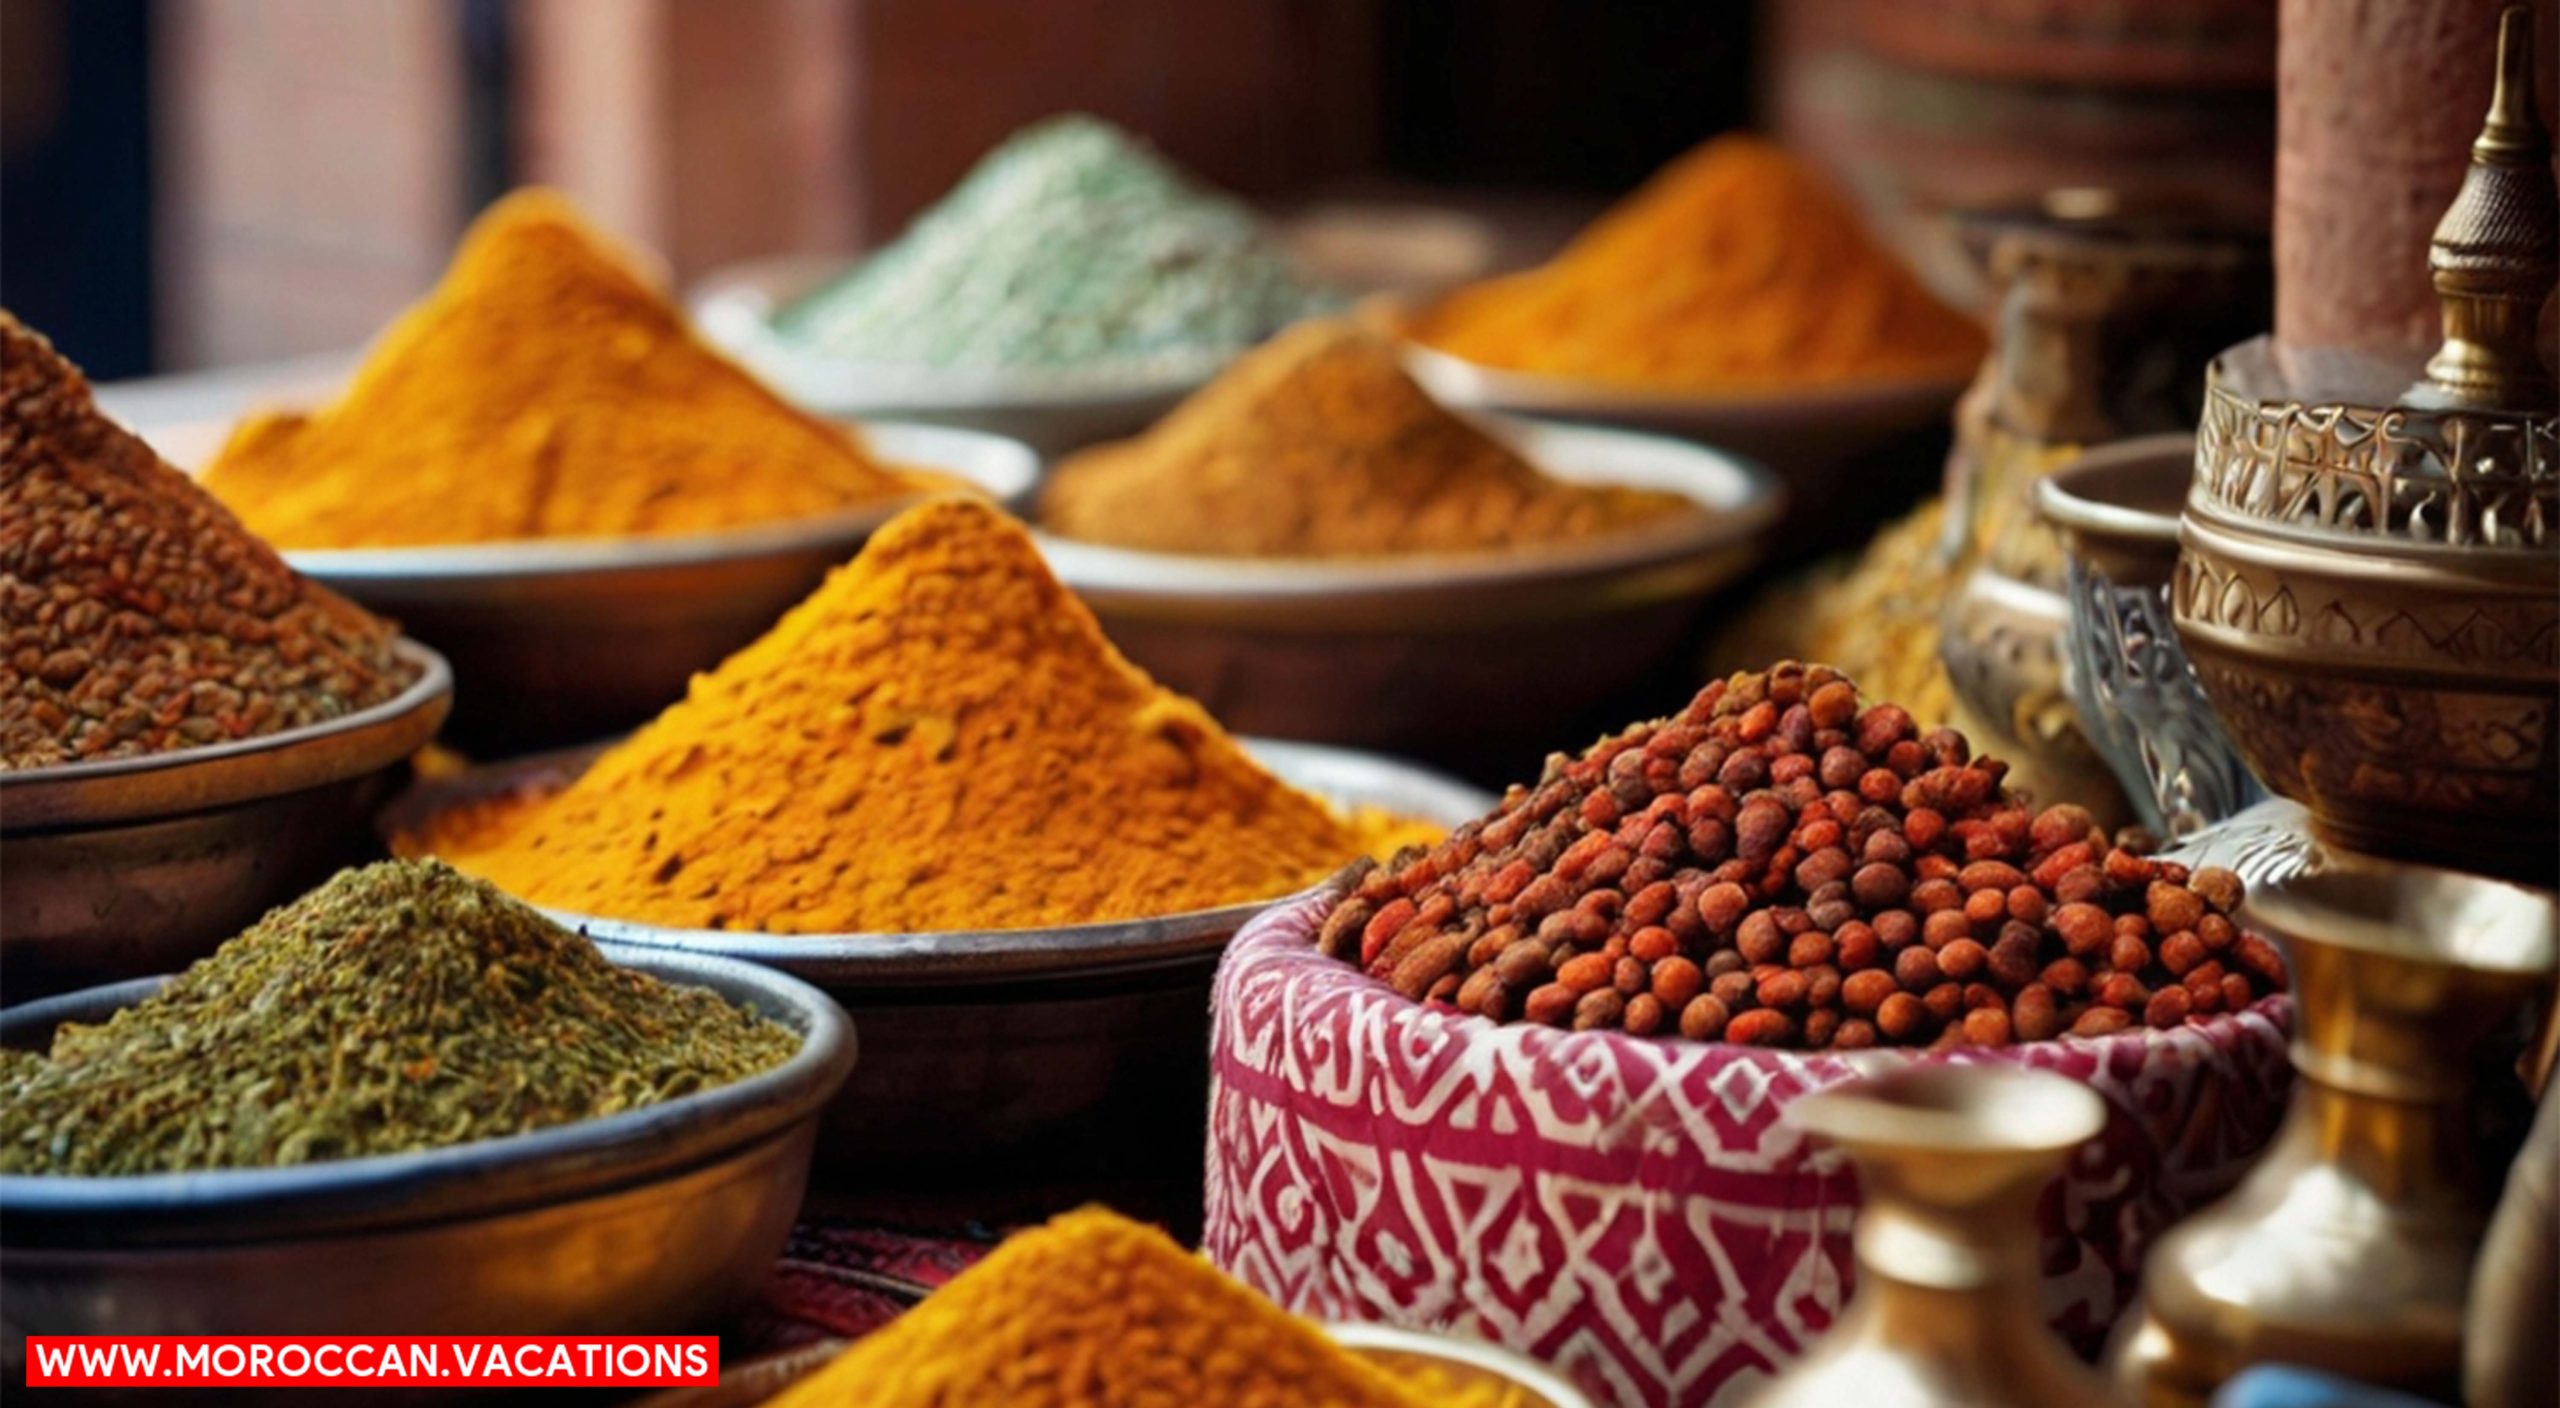 An image of moroccan spices.